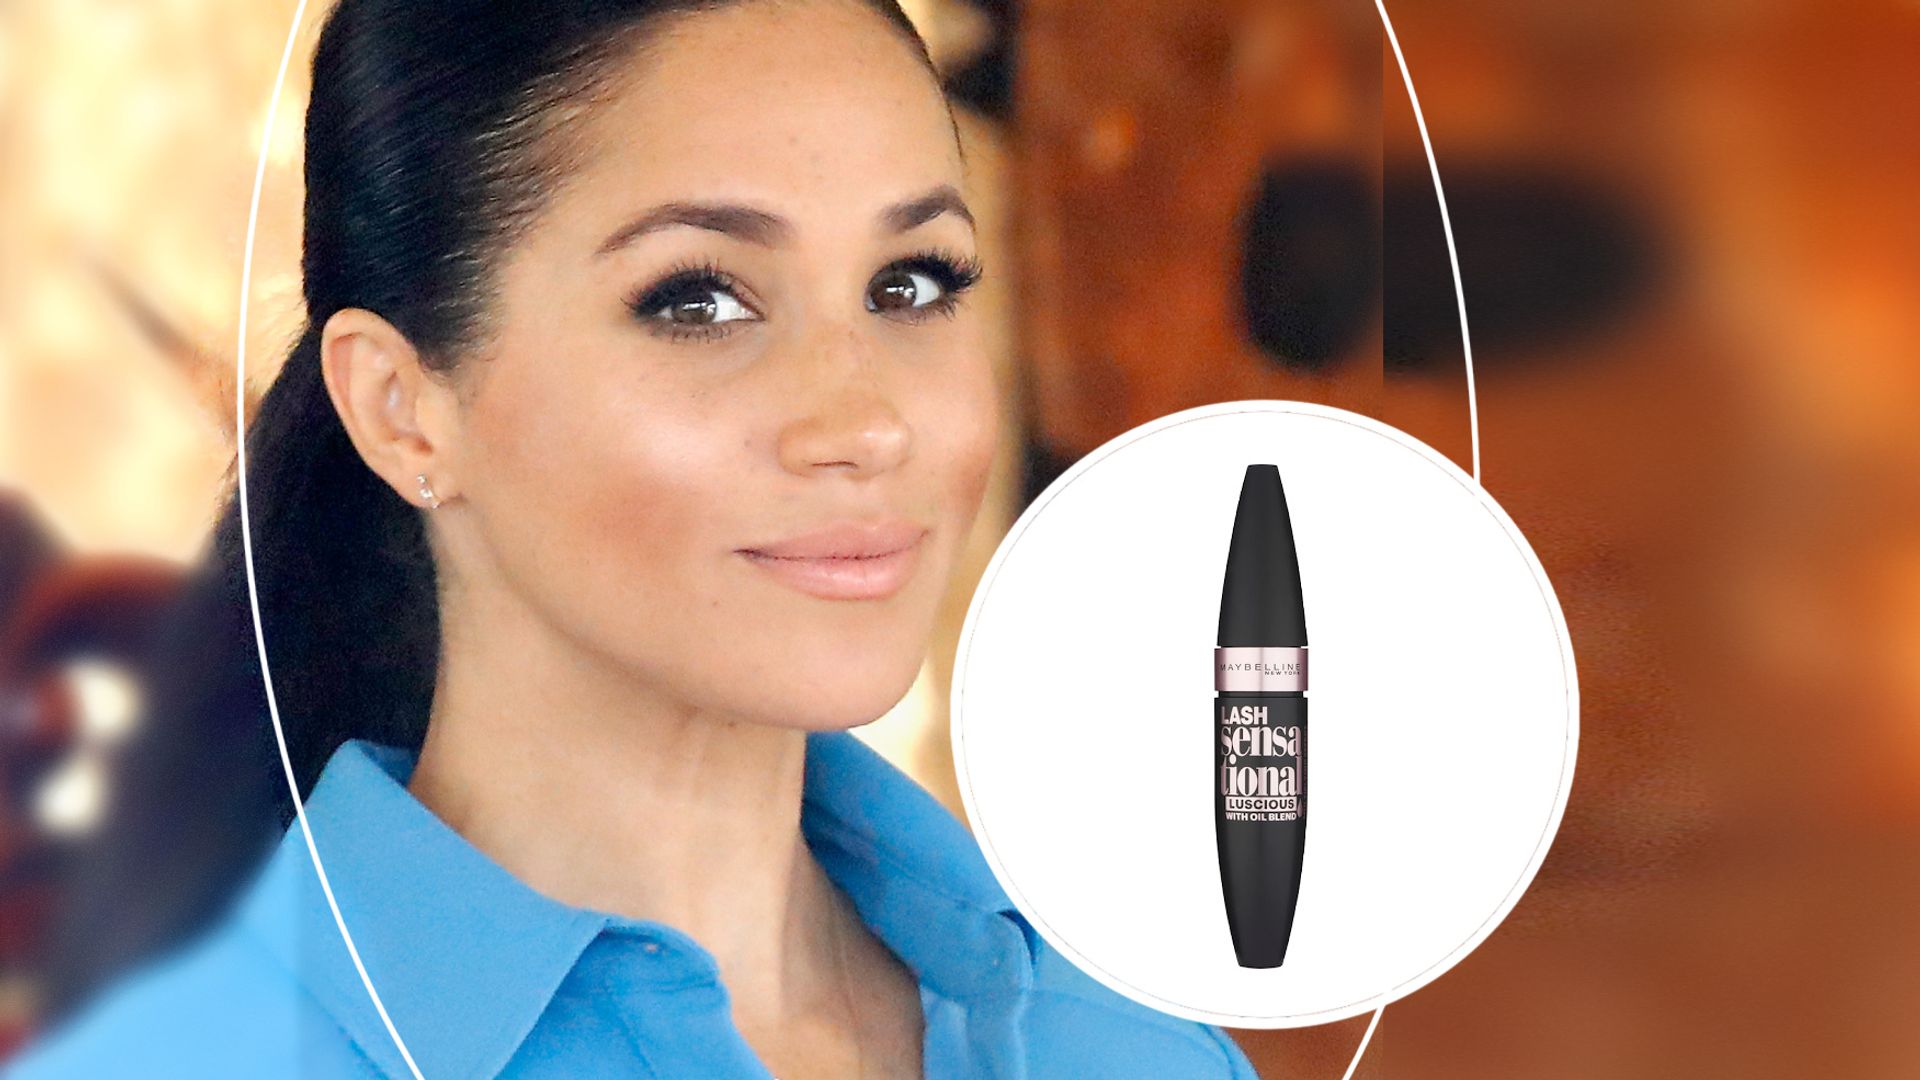 This Meghan Markle-approved drugstore mascara is SO cheap on Amazon & it's my holy grail